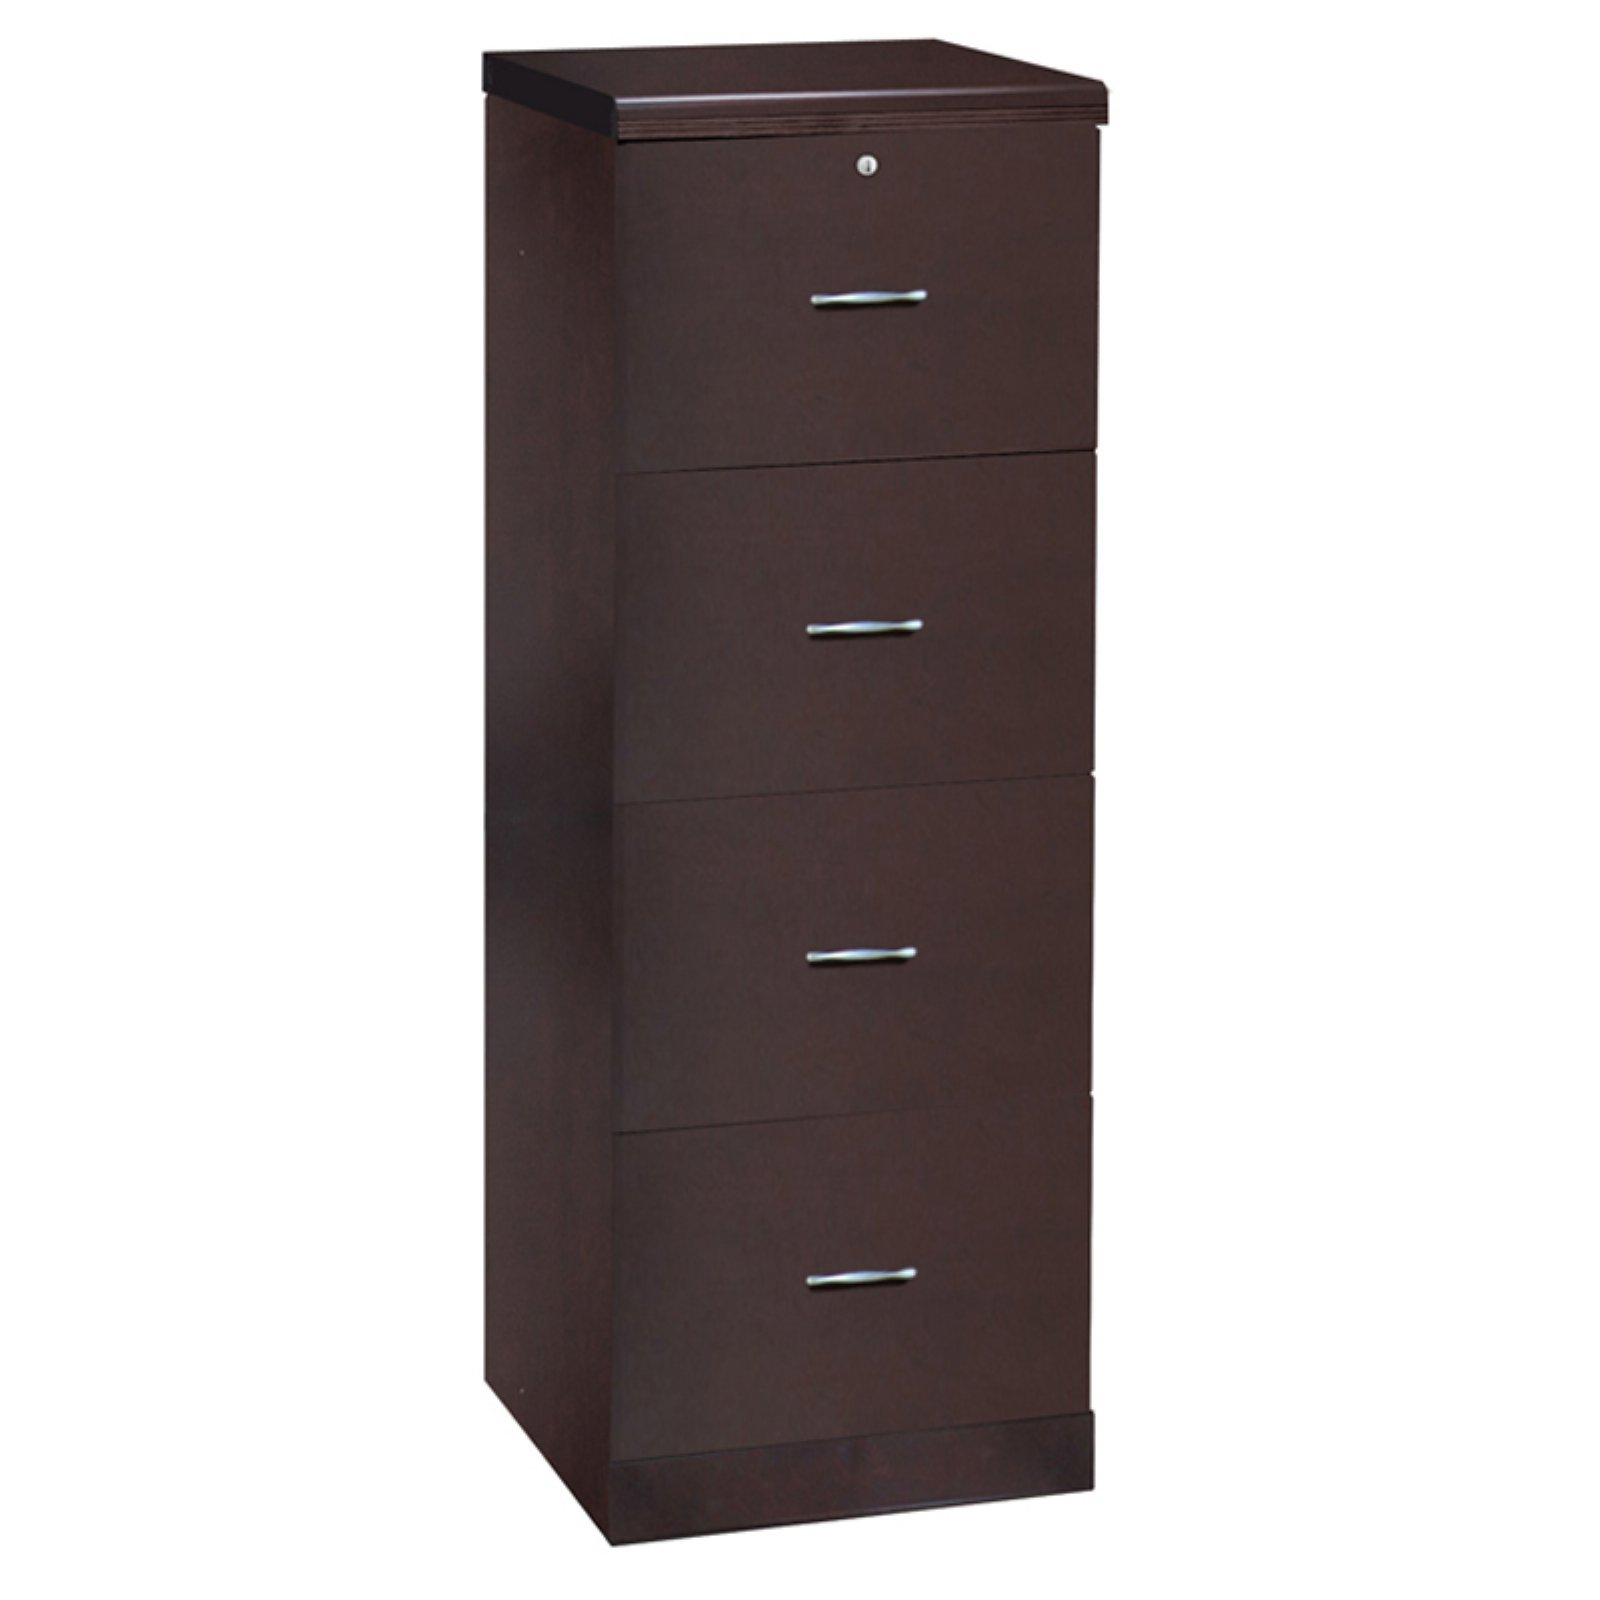 4 Drawer Vertical Wood Lockable Filing Cabinet Espresso Walmart intended for dimensions 1600 X 1600